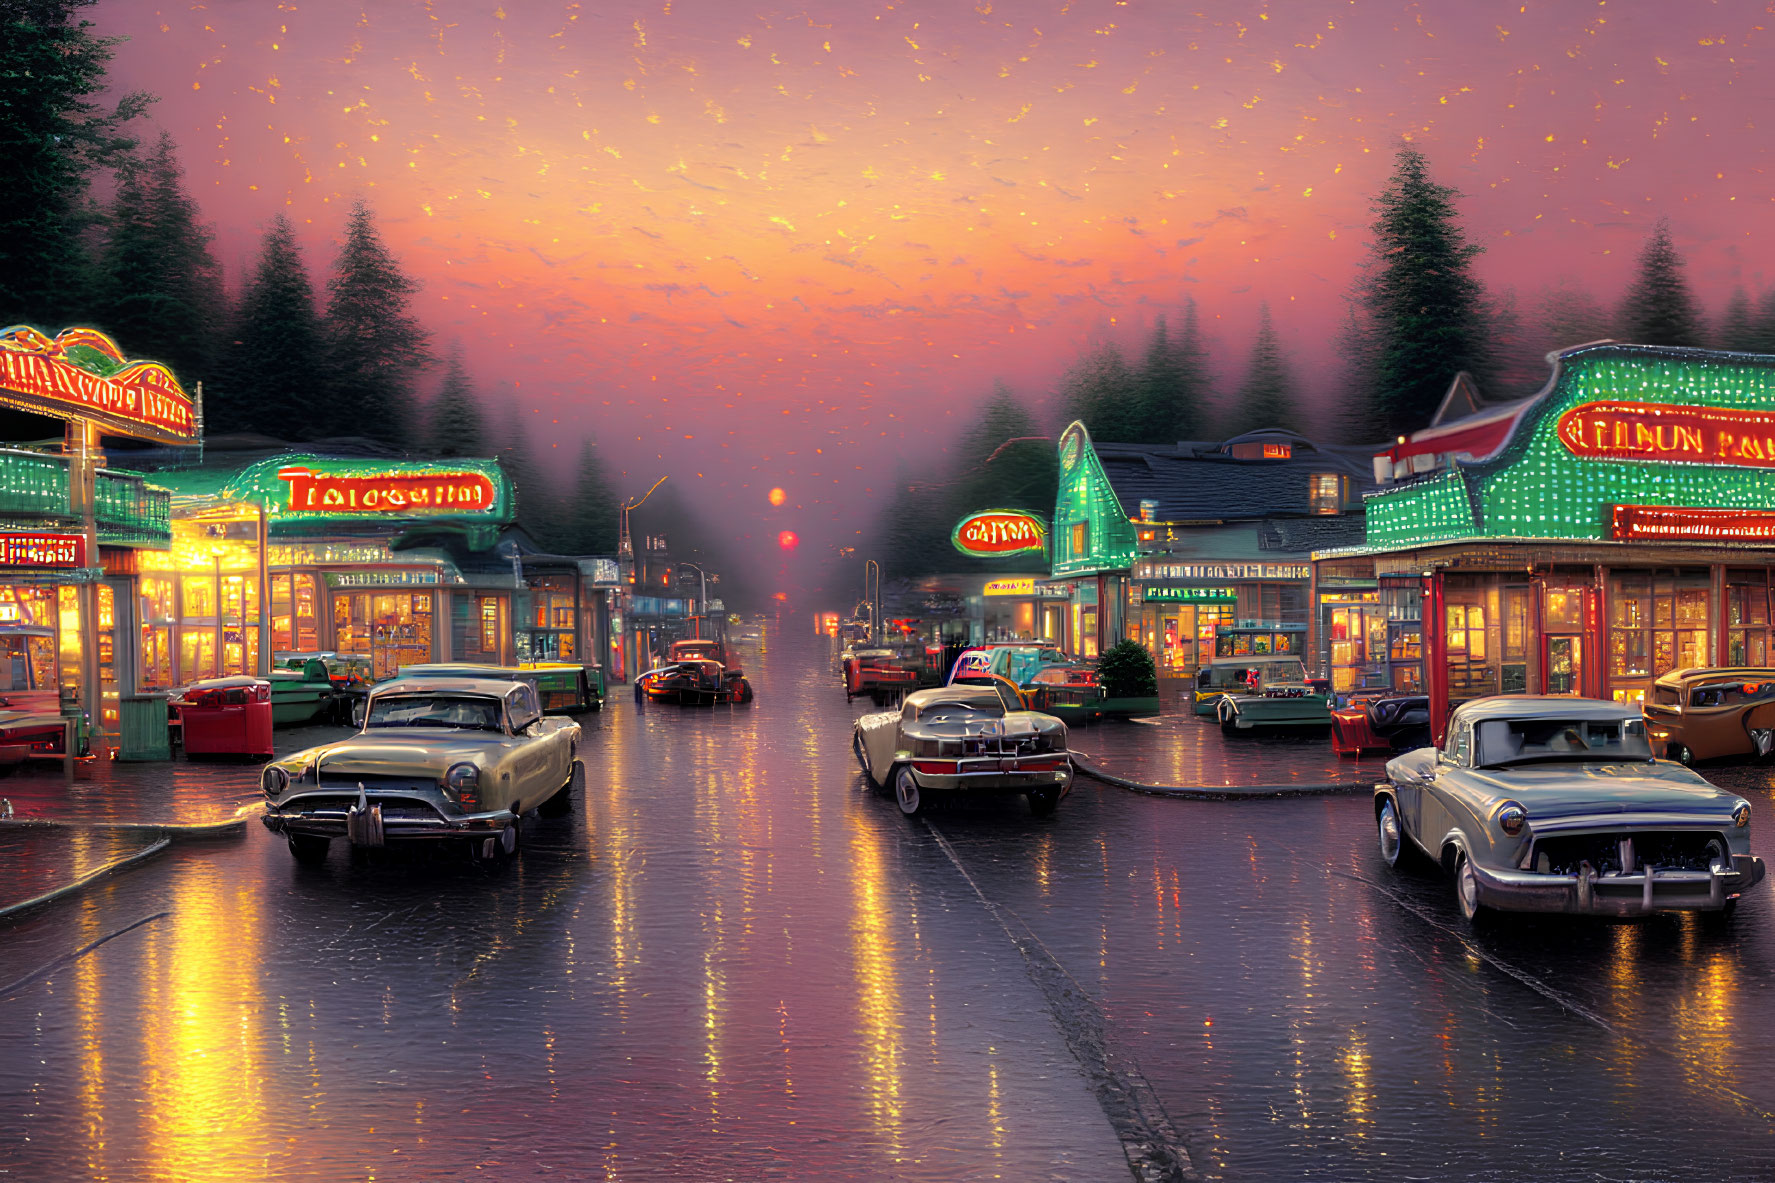 Classic Cars Parked on Wet Street at Dusk with Neon-lit Diners and Shops